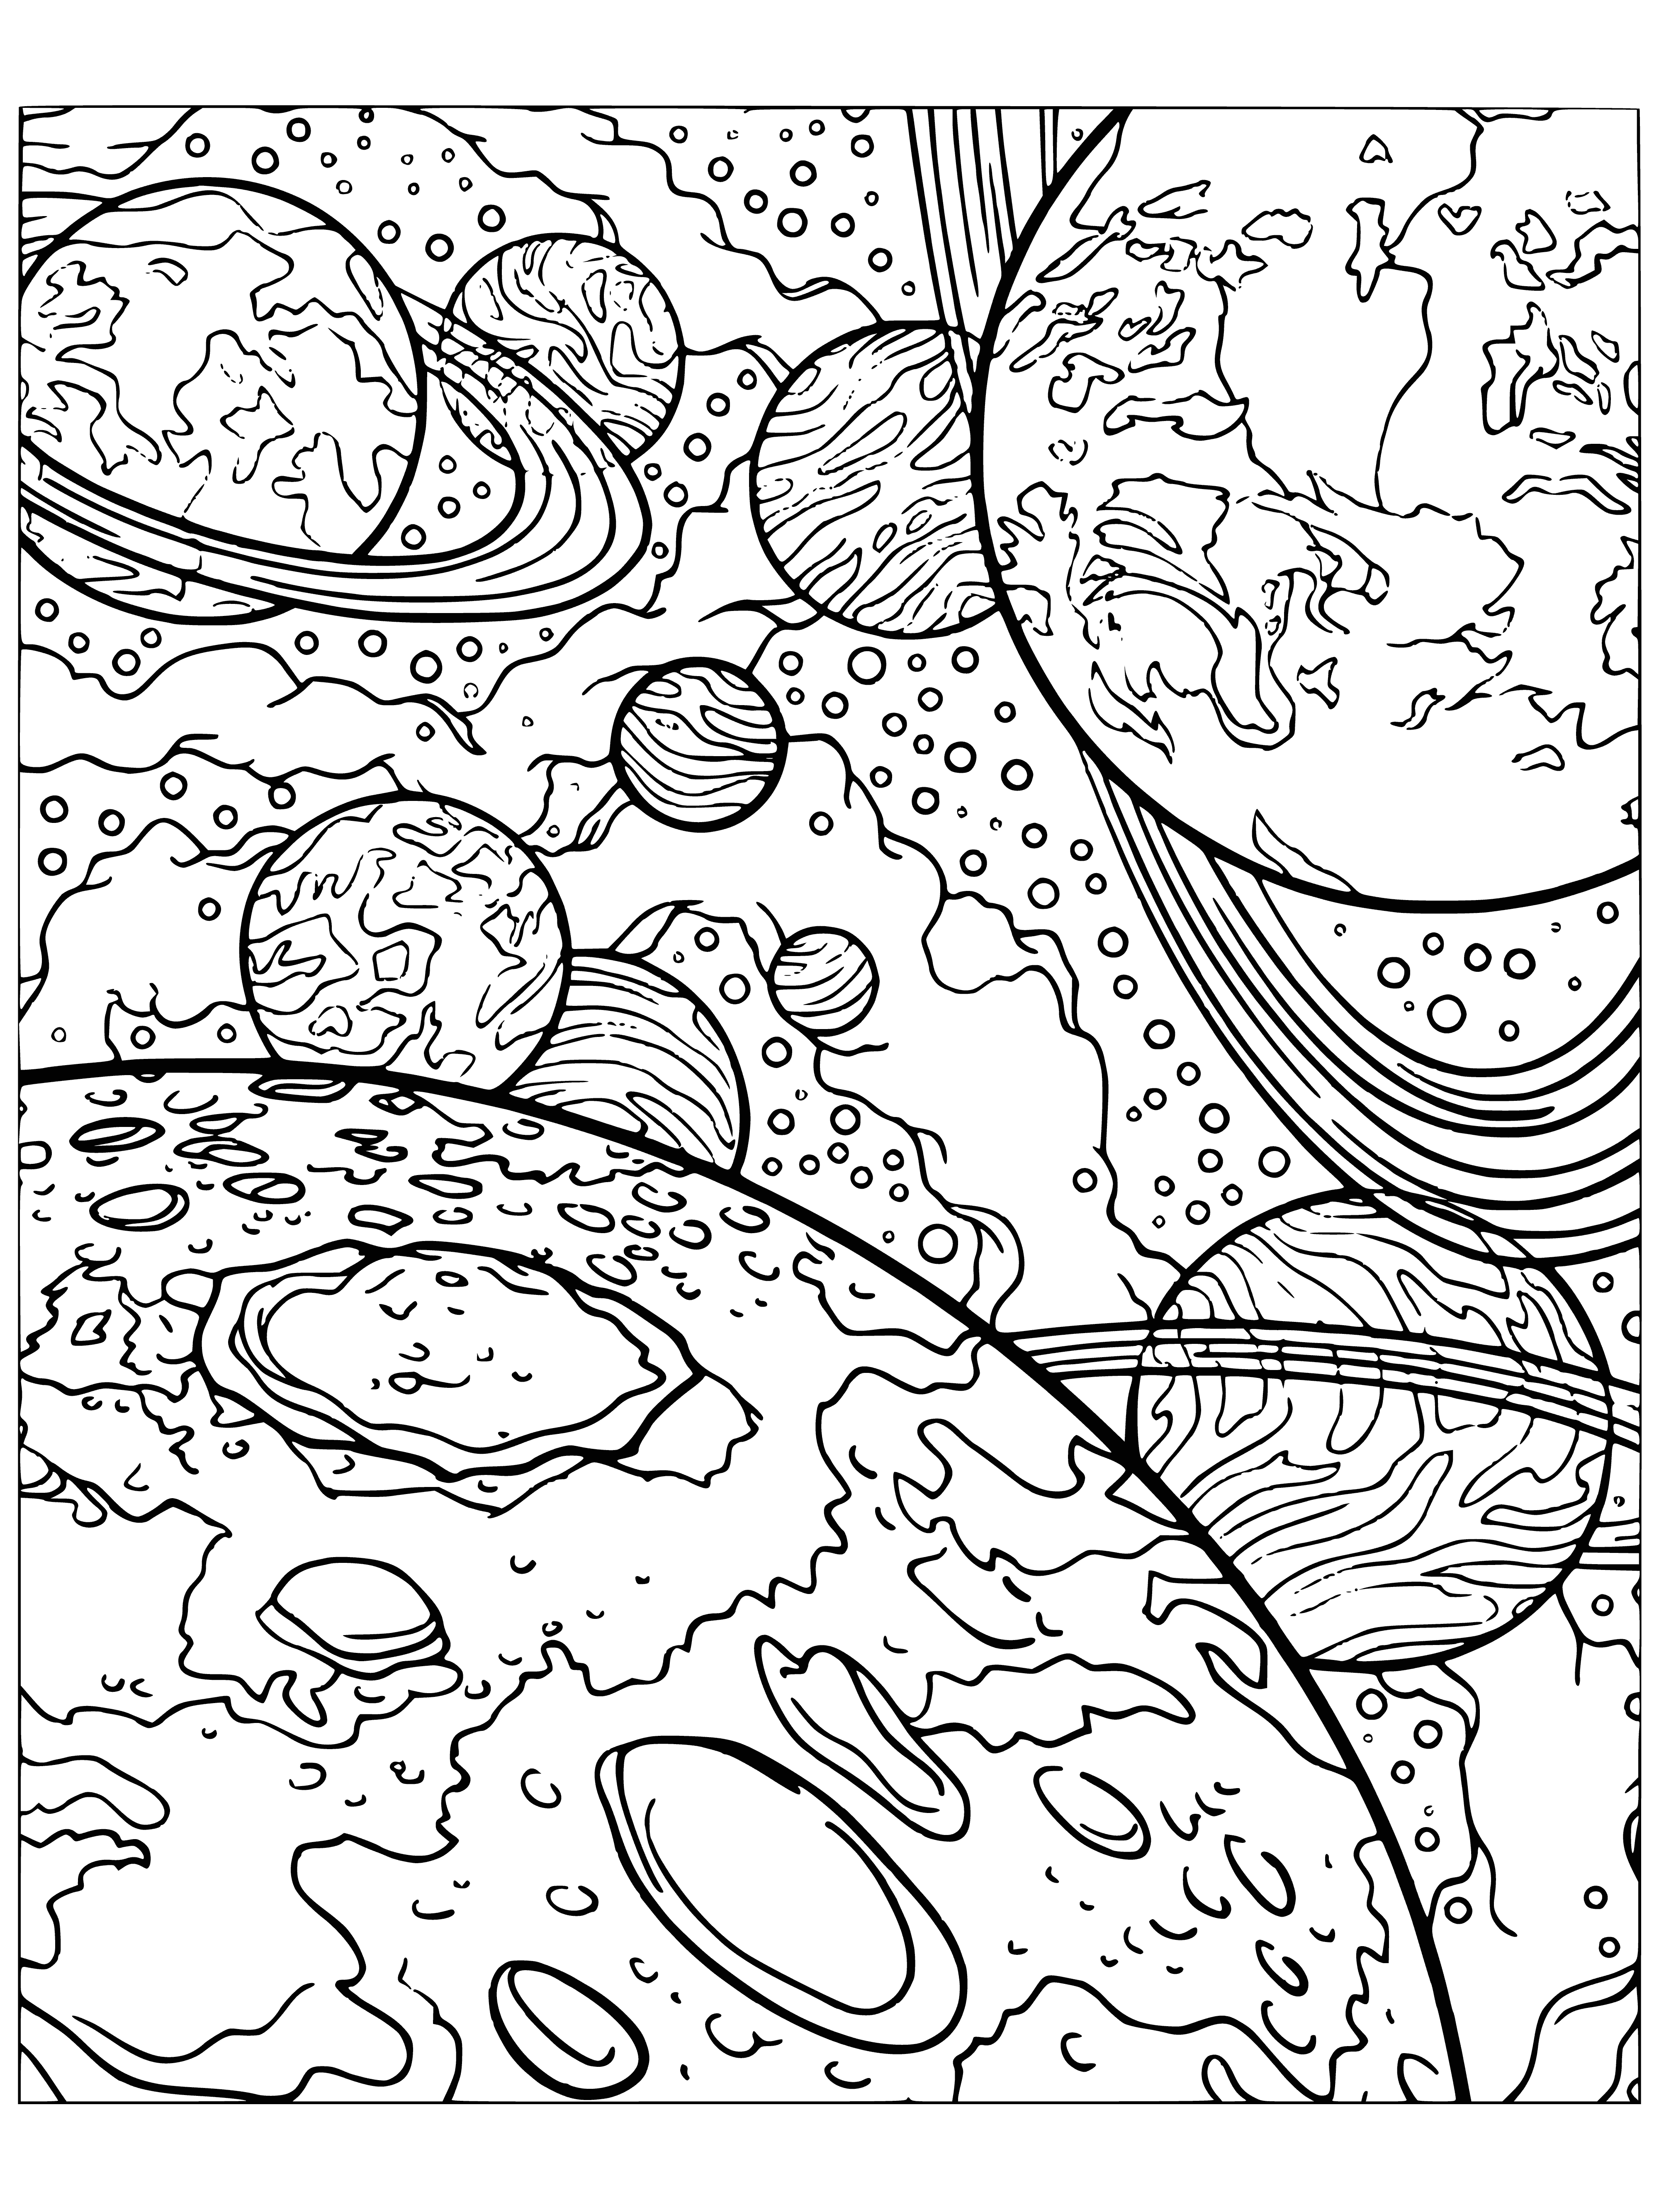 coloring page: Person in a spacecraft, reducing stress with peaceful coloring, surrounded by beauty of universe.